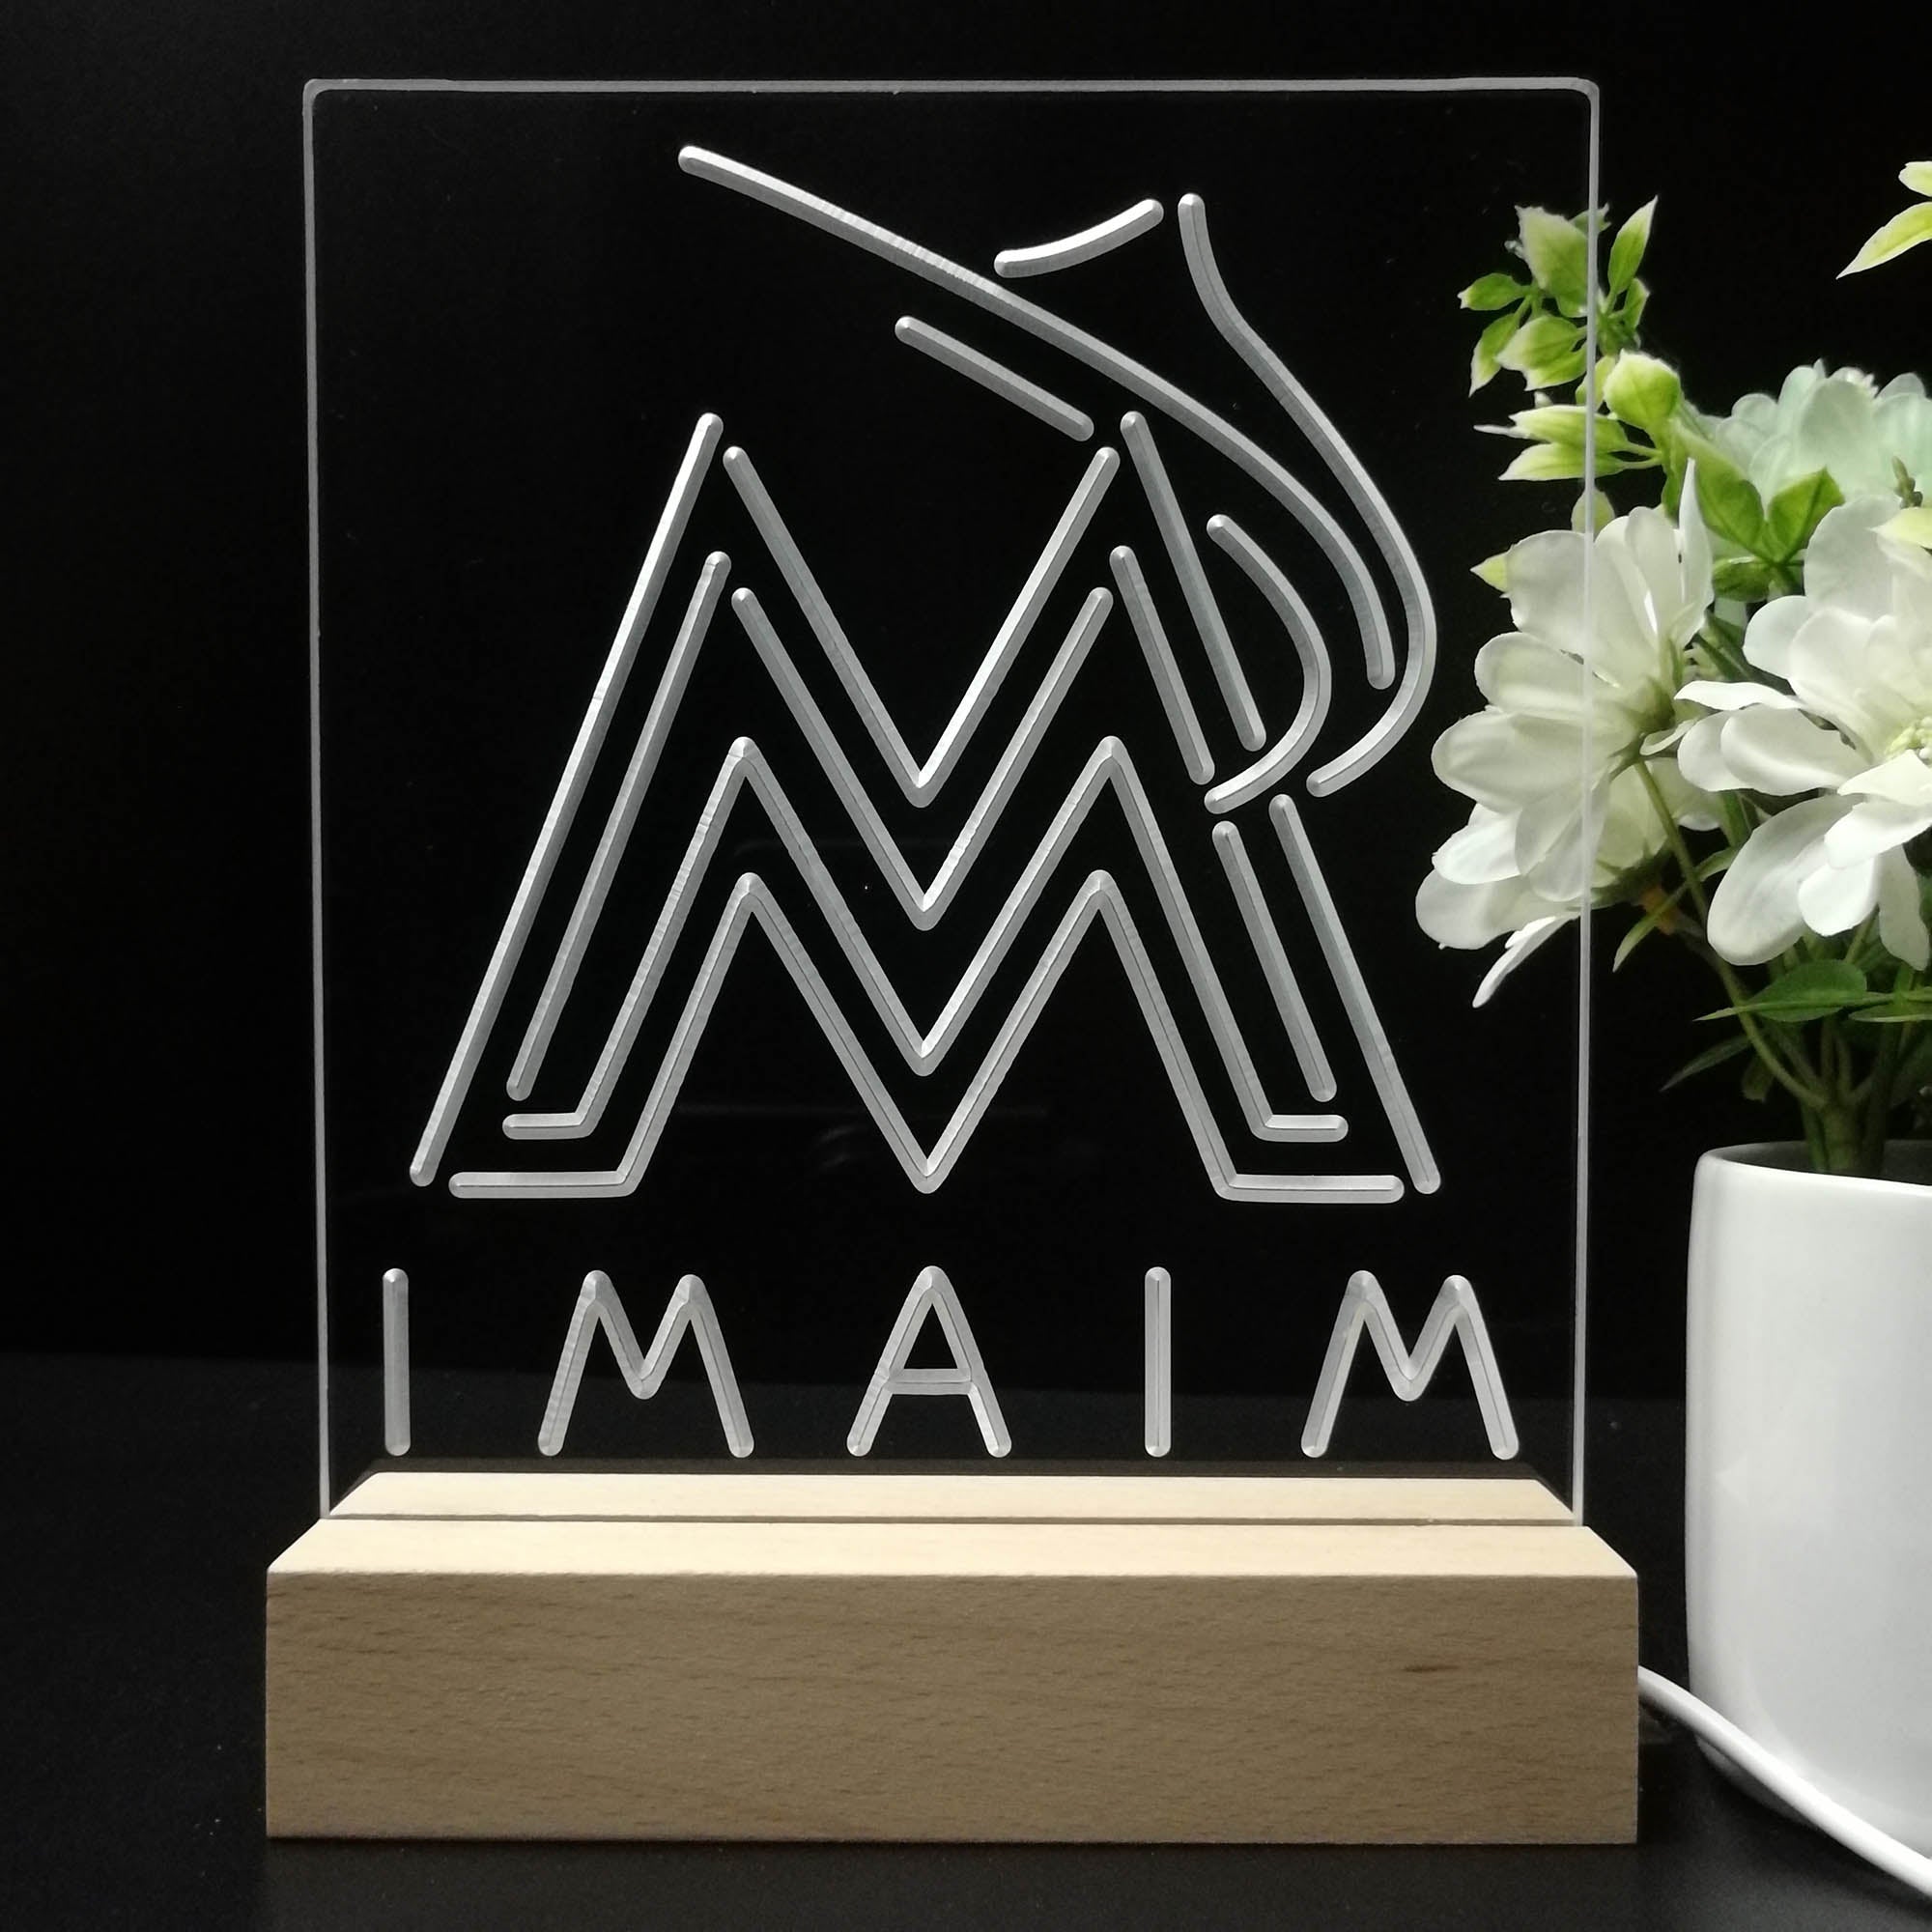 Florida Marlins Neon Sign Table Top Lamp